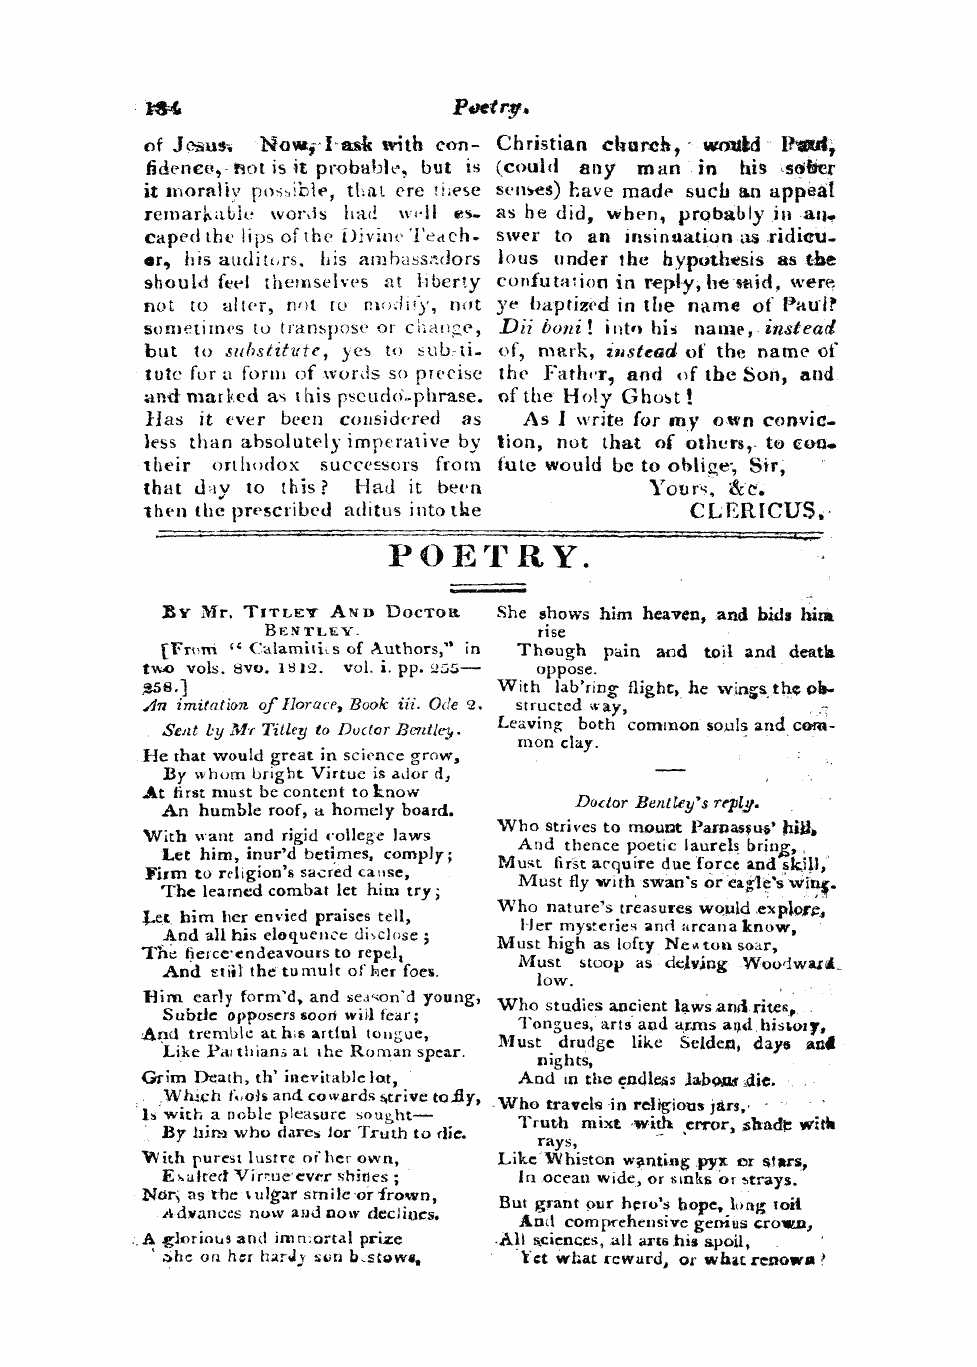 Monthly Repository (1806-1838) and Unitarian Chronicle (1832-1833): F Y, 1st edition: 48